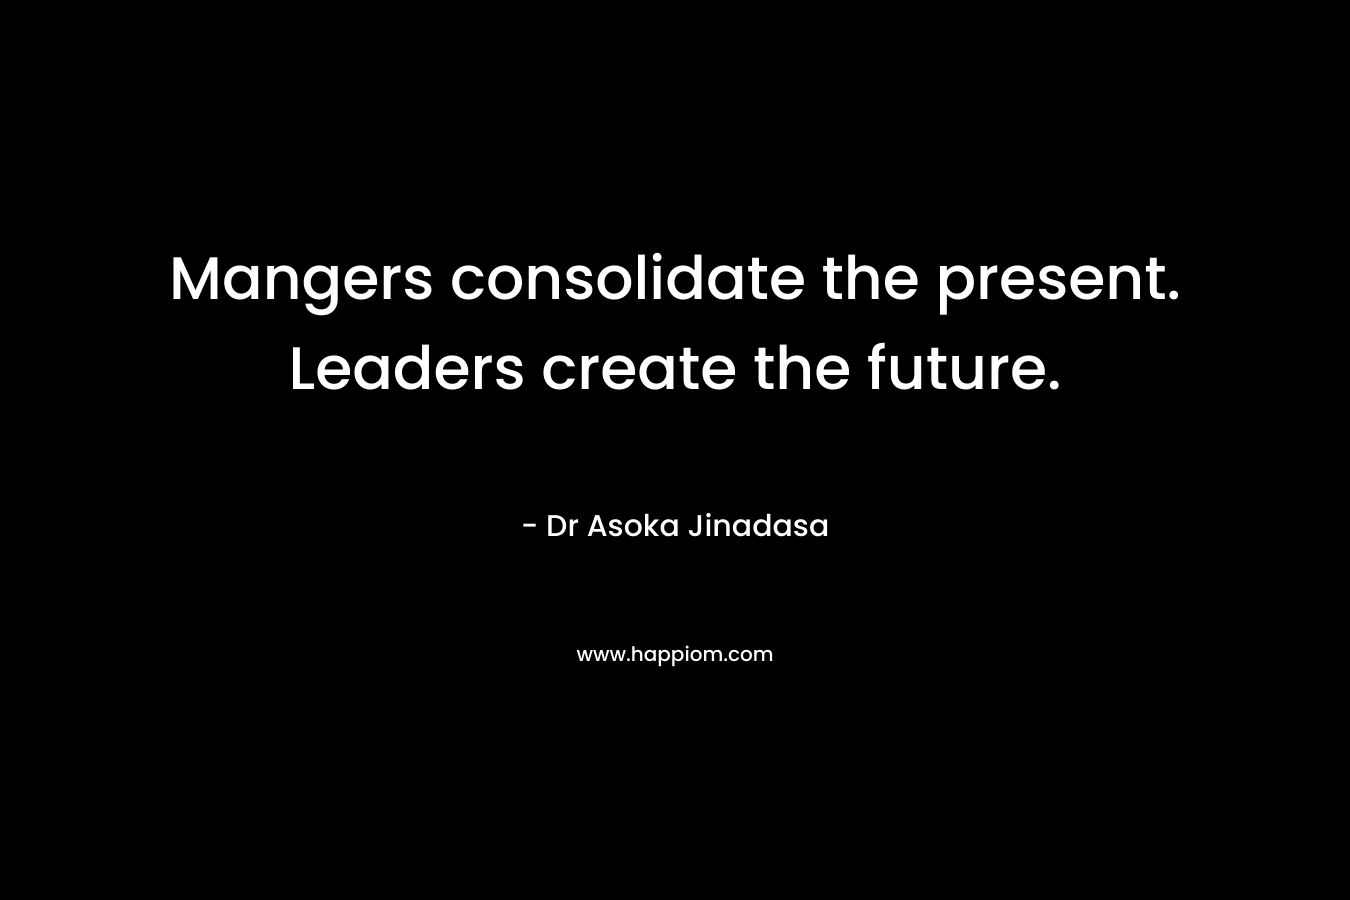 Mangers consolidate the present. Leaders create the future. – Dr Asoka Jinadasa